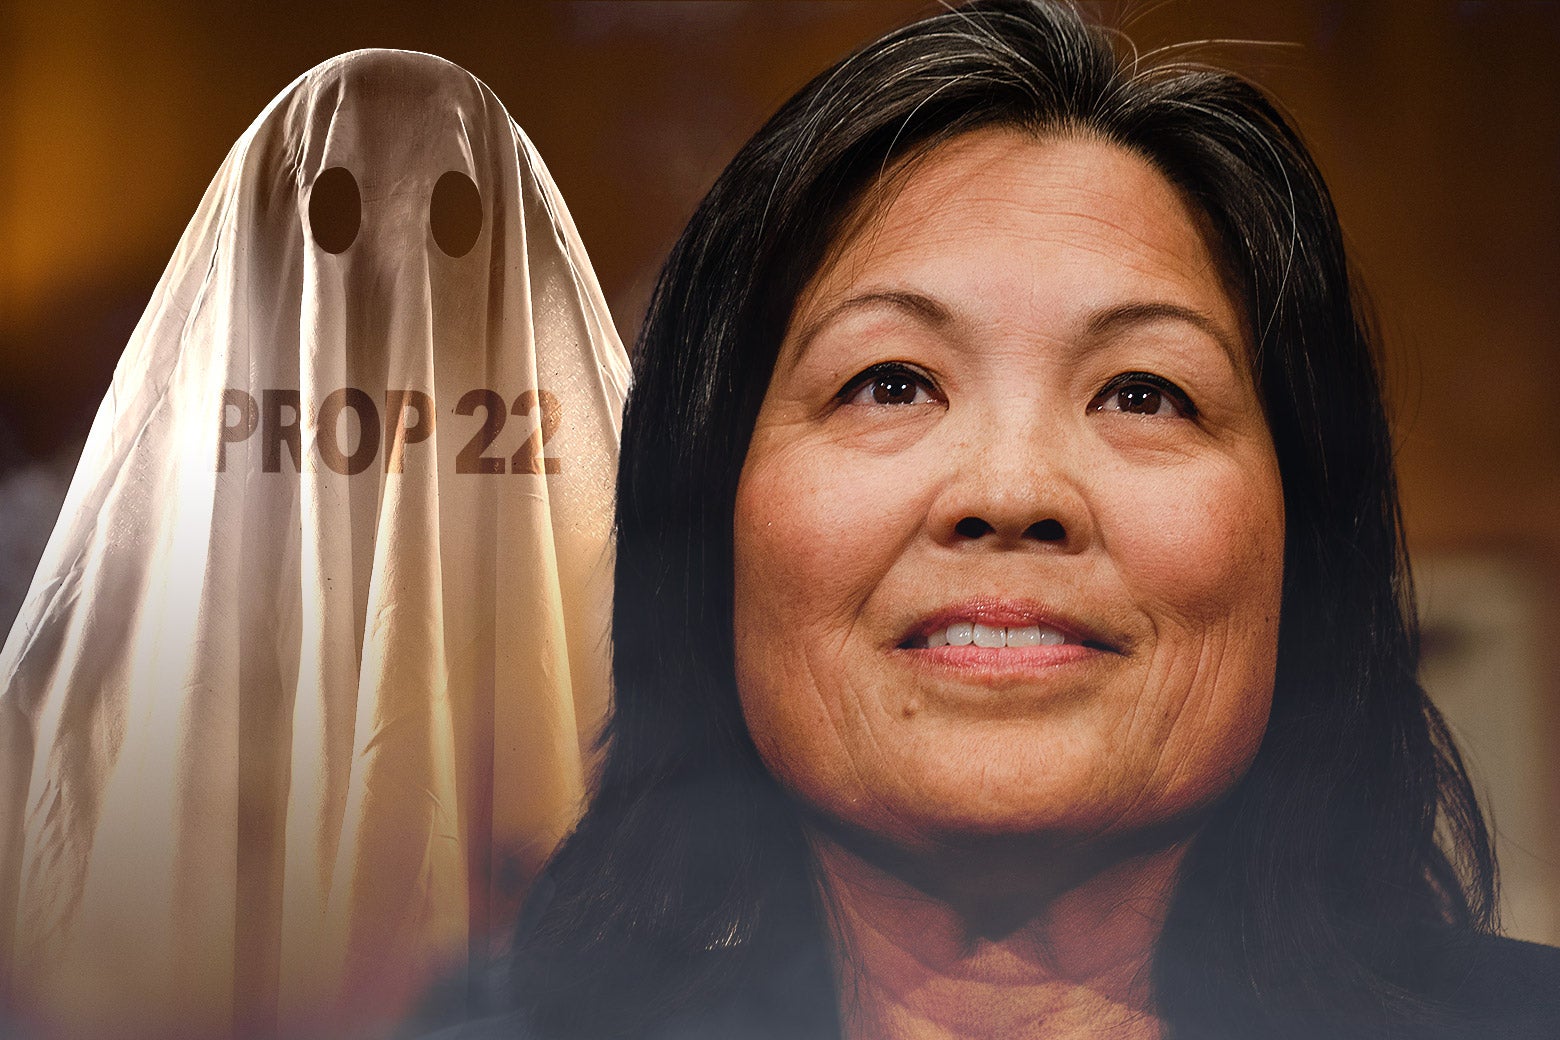 A ghost labeled "Prop 22" looms behind an image of Julie Su, who is President Biden's nominee for labor secretary.